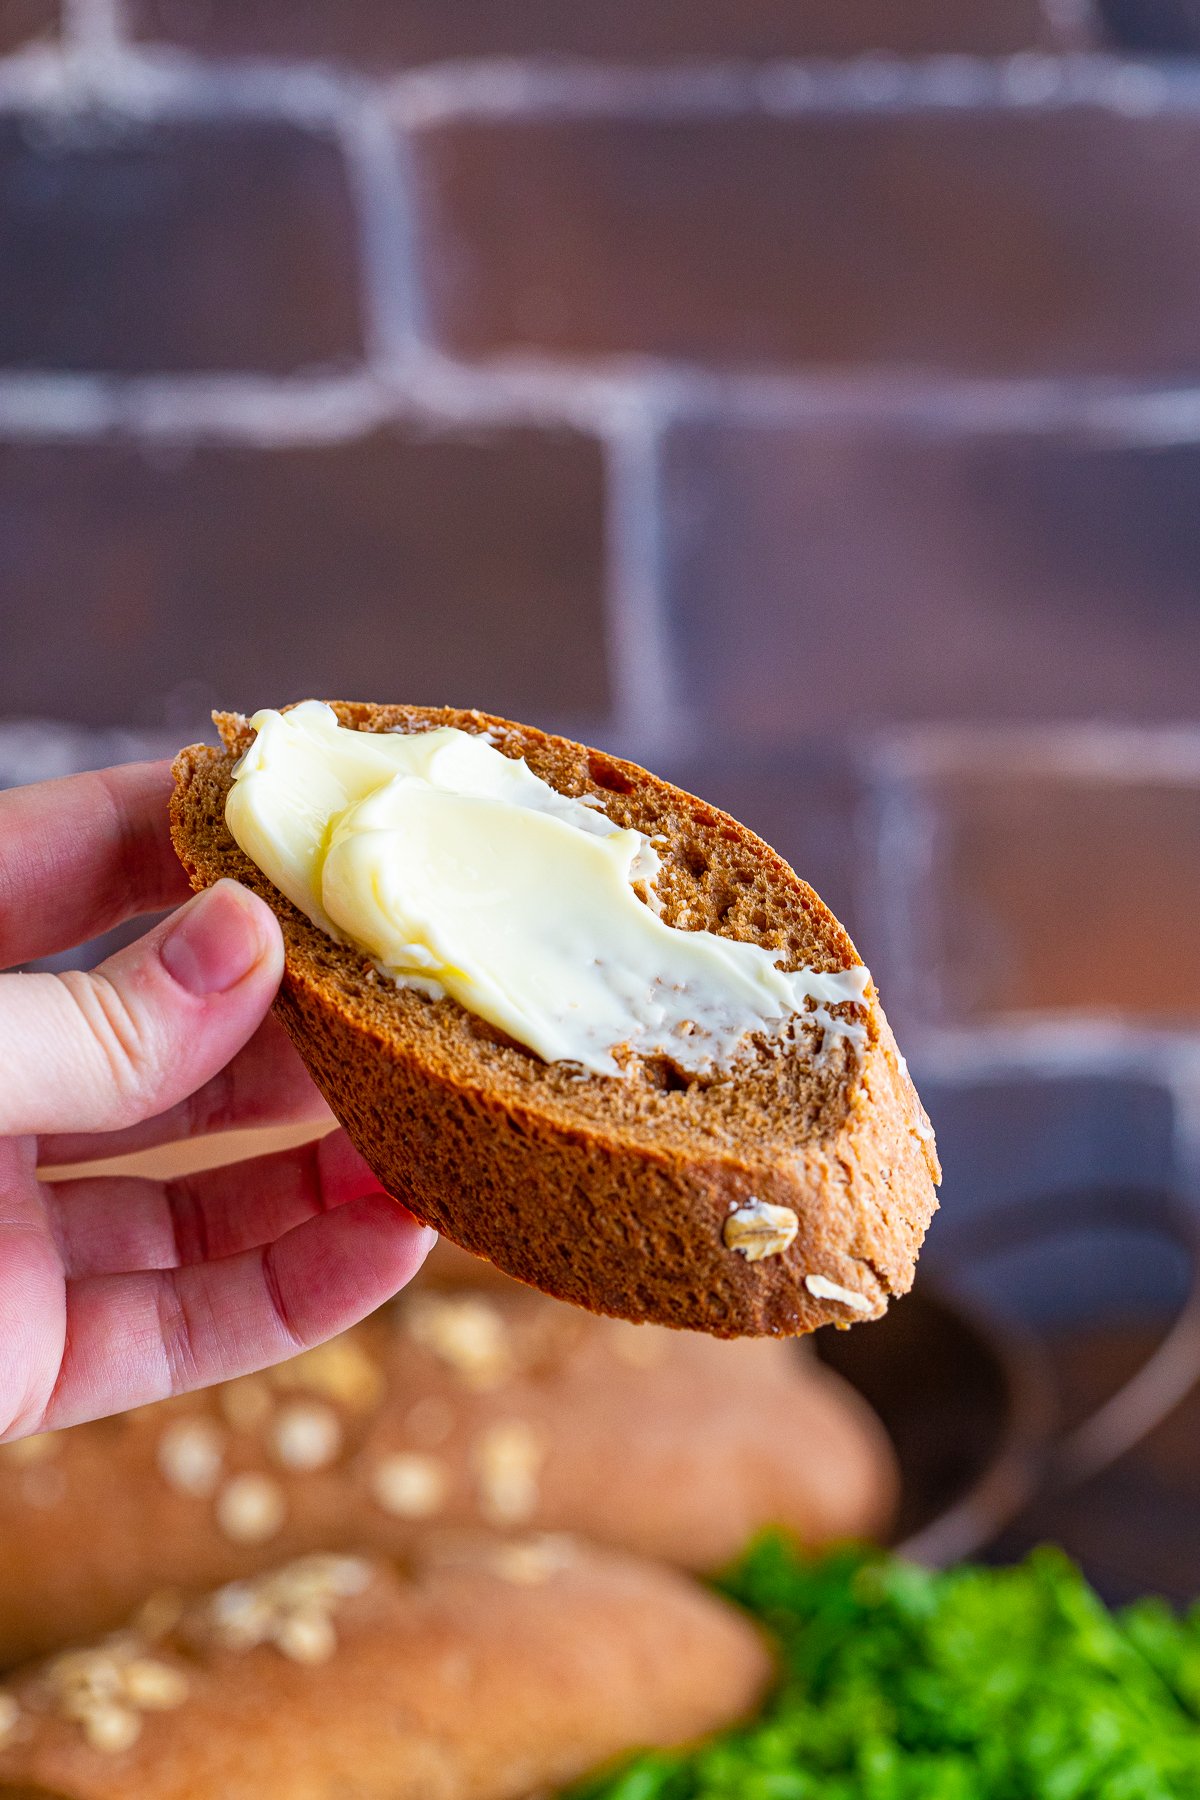 Hand holding up one slice of Brown Bread slathered with butter.